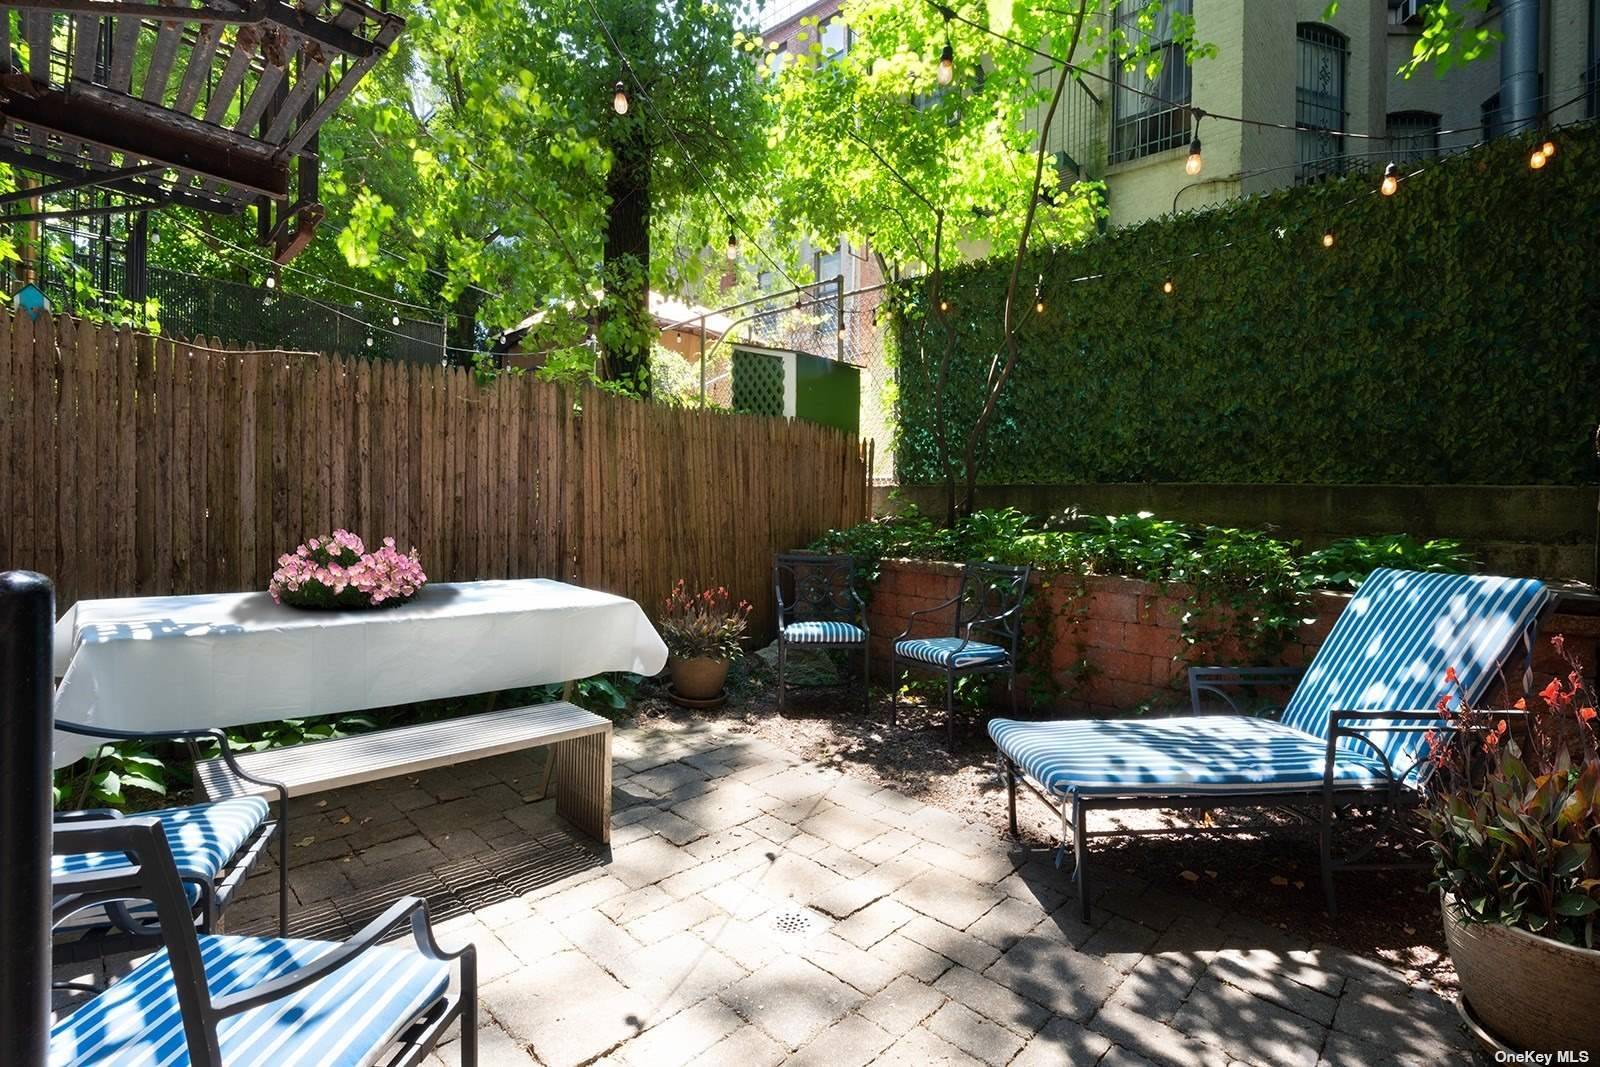 With three bedrooms and three bathrooms, this duplex garden condominium in prime Harlem maximizes live work play flexibility with three outdoor spaces including a private garden and over 2, 000 ...